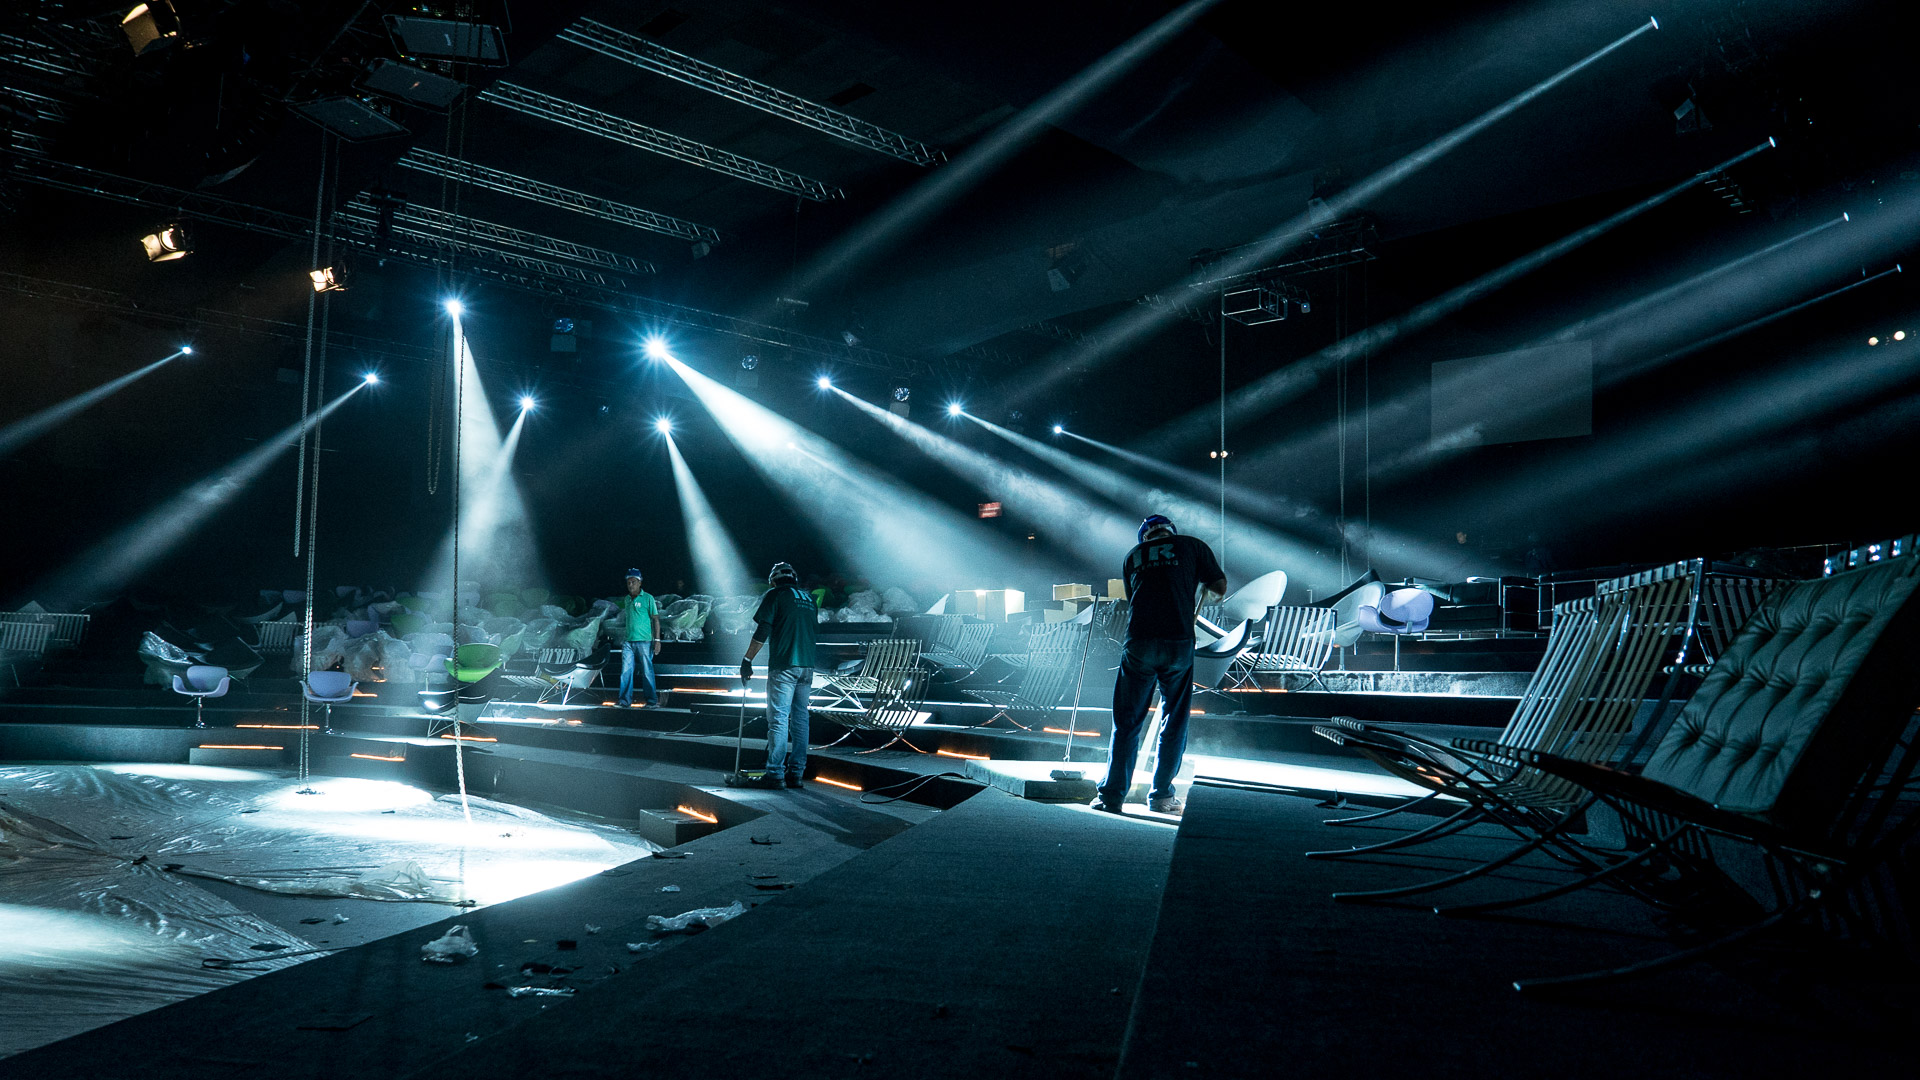 Inside the TEDGlobal Beach Theater, an extension of the Copacabana Palace Hotel, workers attend to the final touches while our crew tests the lights! Photo: James Duncan Davidson